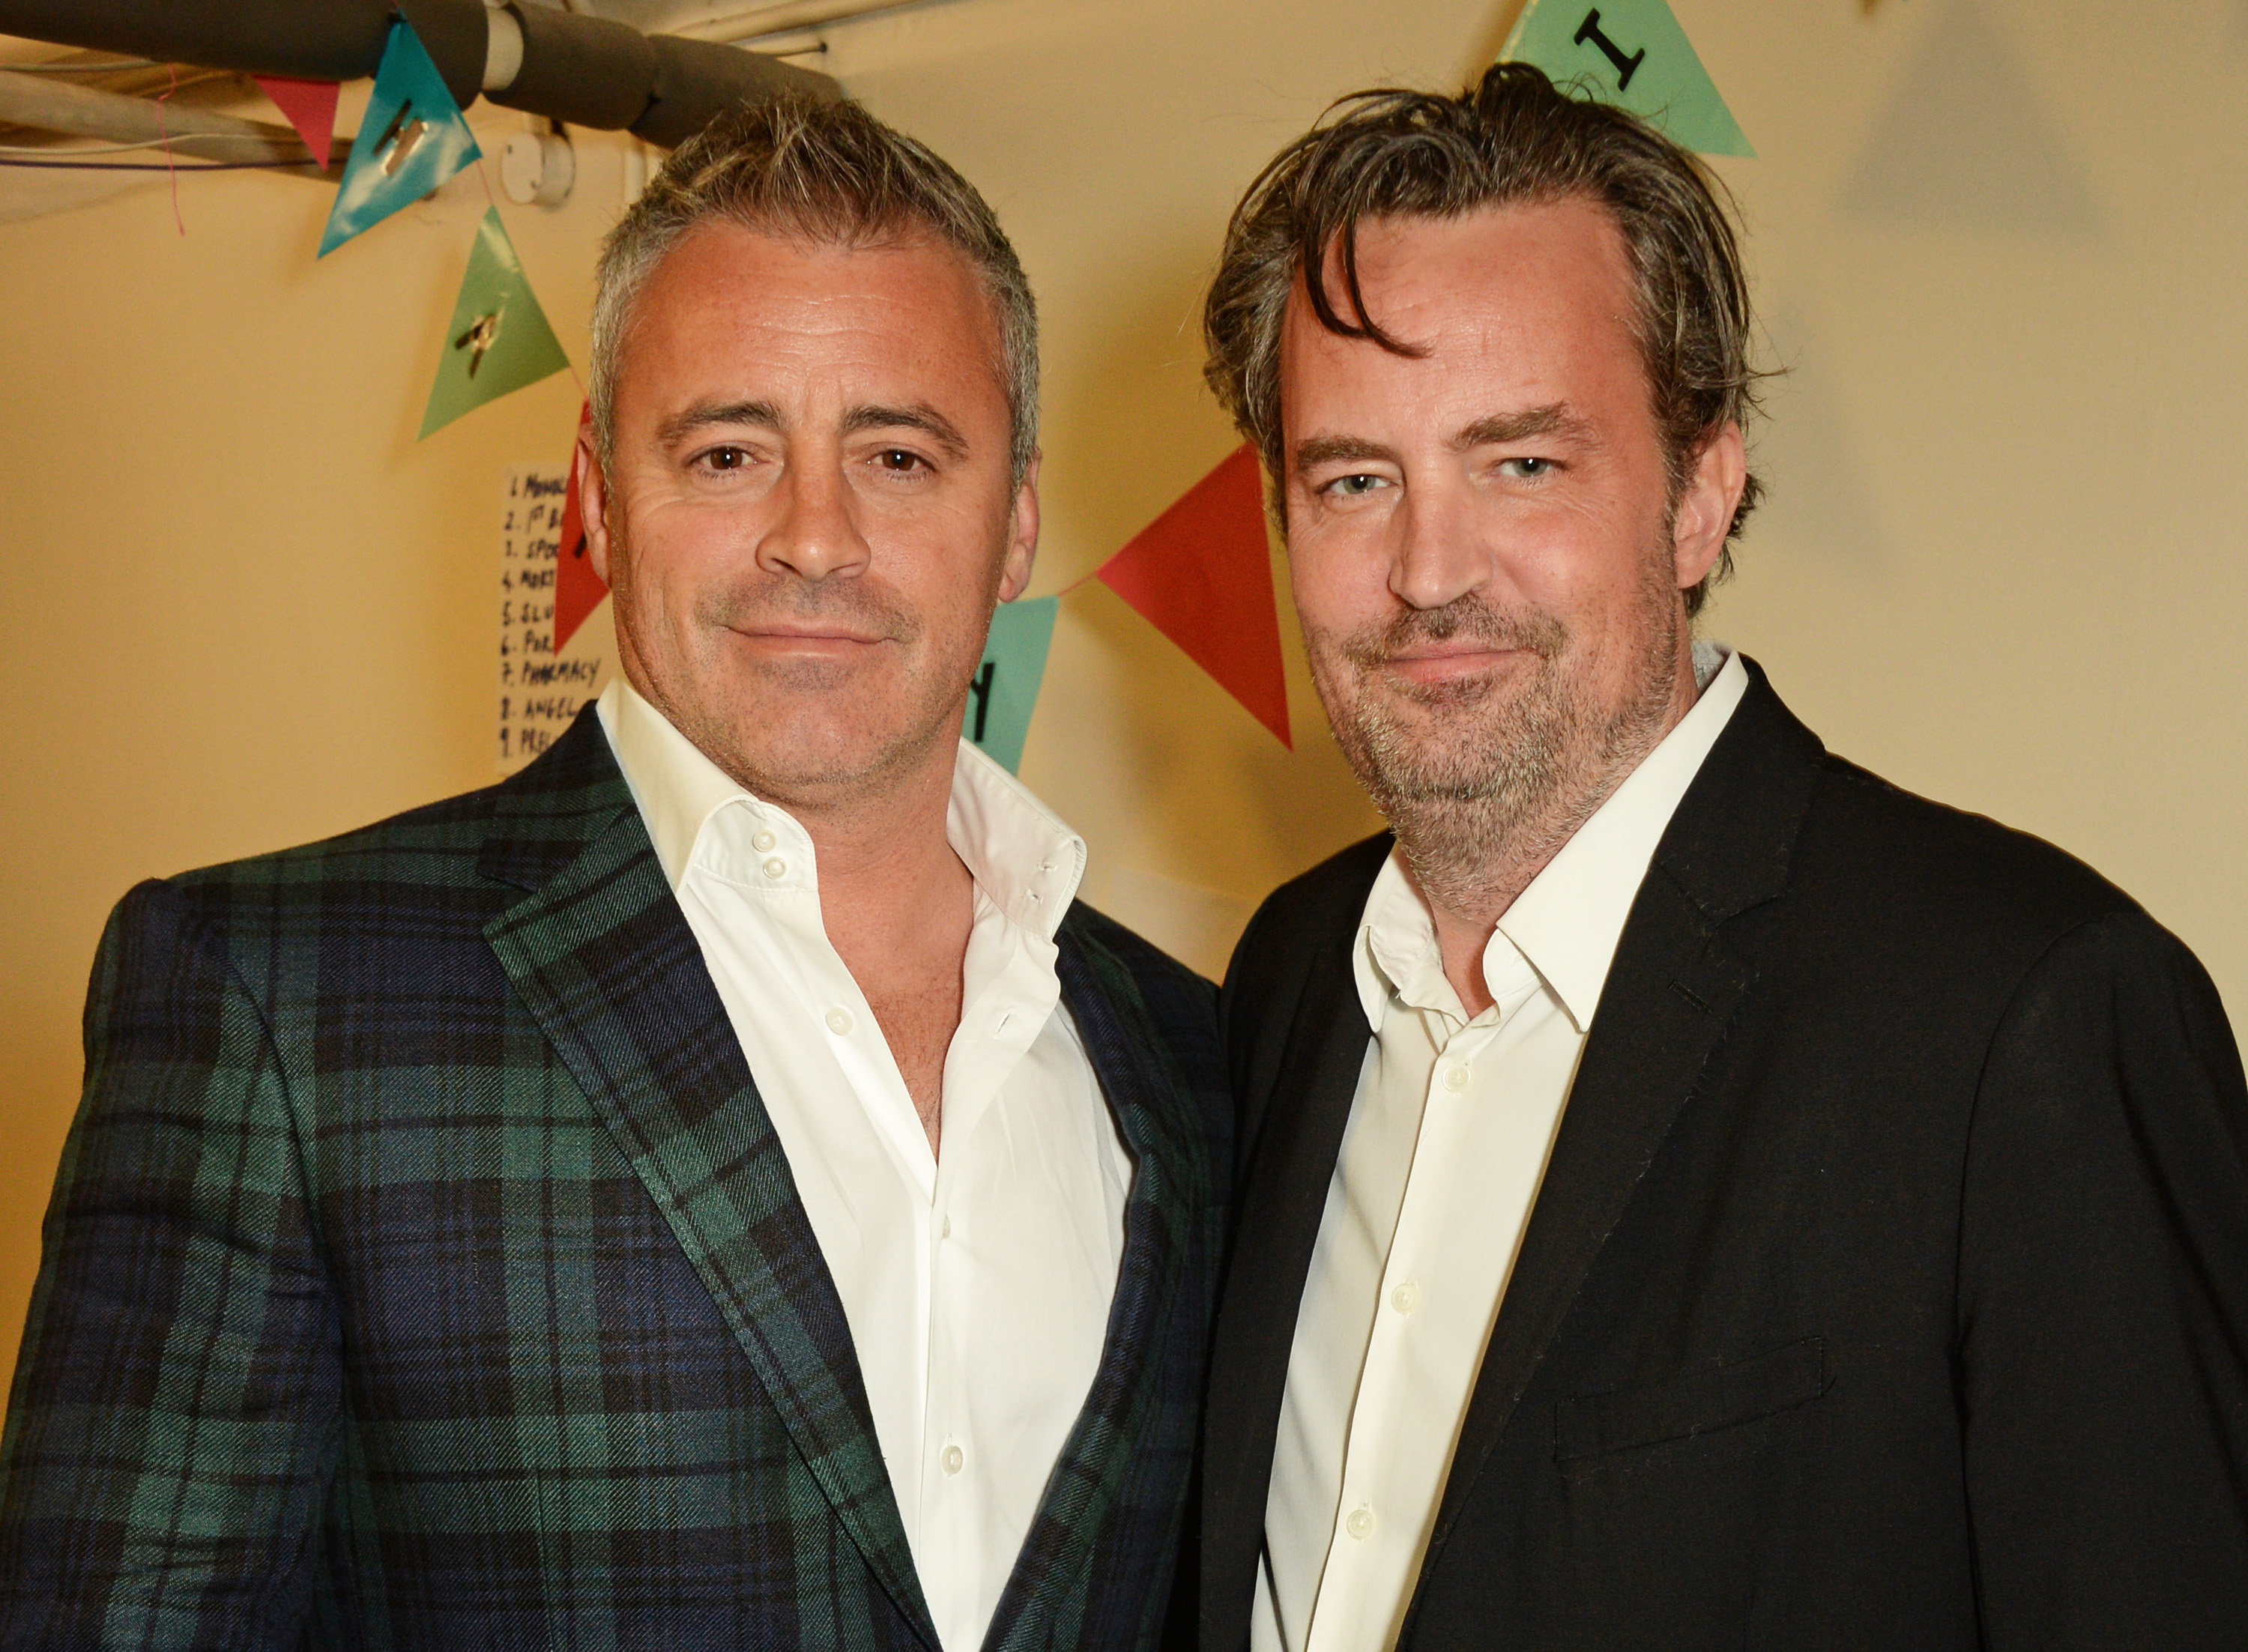 Matt LeBlanc and Matthew Perry pose backstage following a performance of "The End Of Longing" in London, England, on April 30, 2016. | Source: Getty Images